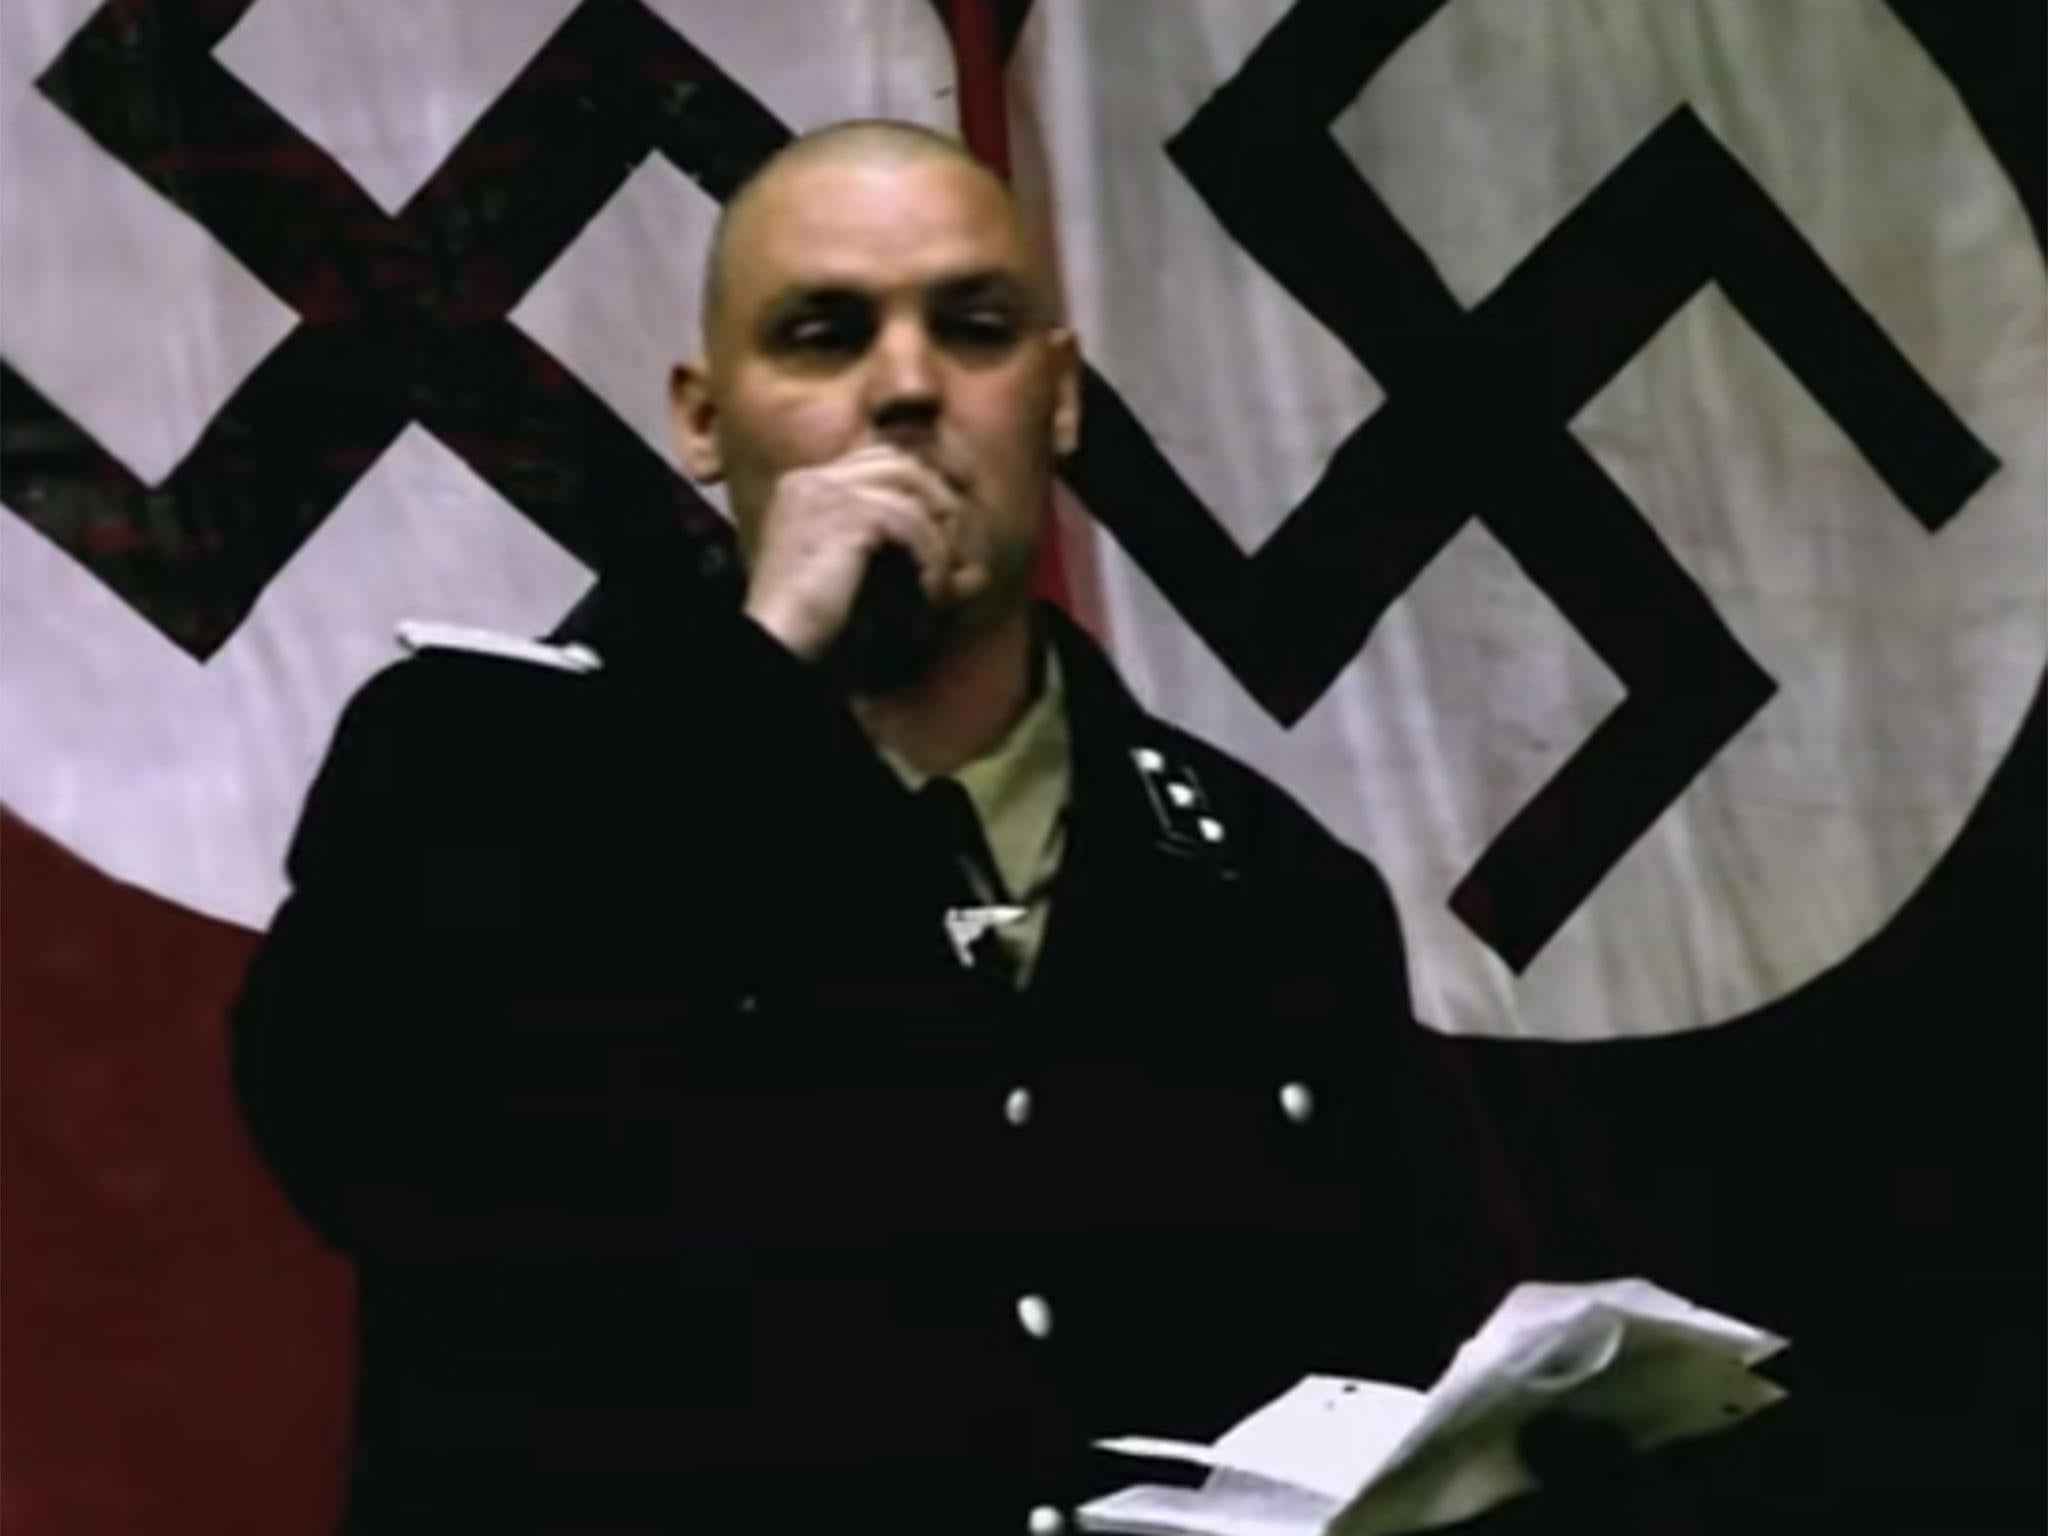 Jeff Hall, a prominent neo Nazi, was shot by his son, Joseph, while he was sleeping.